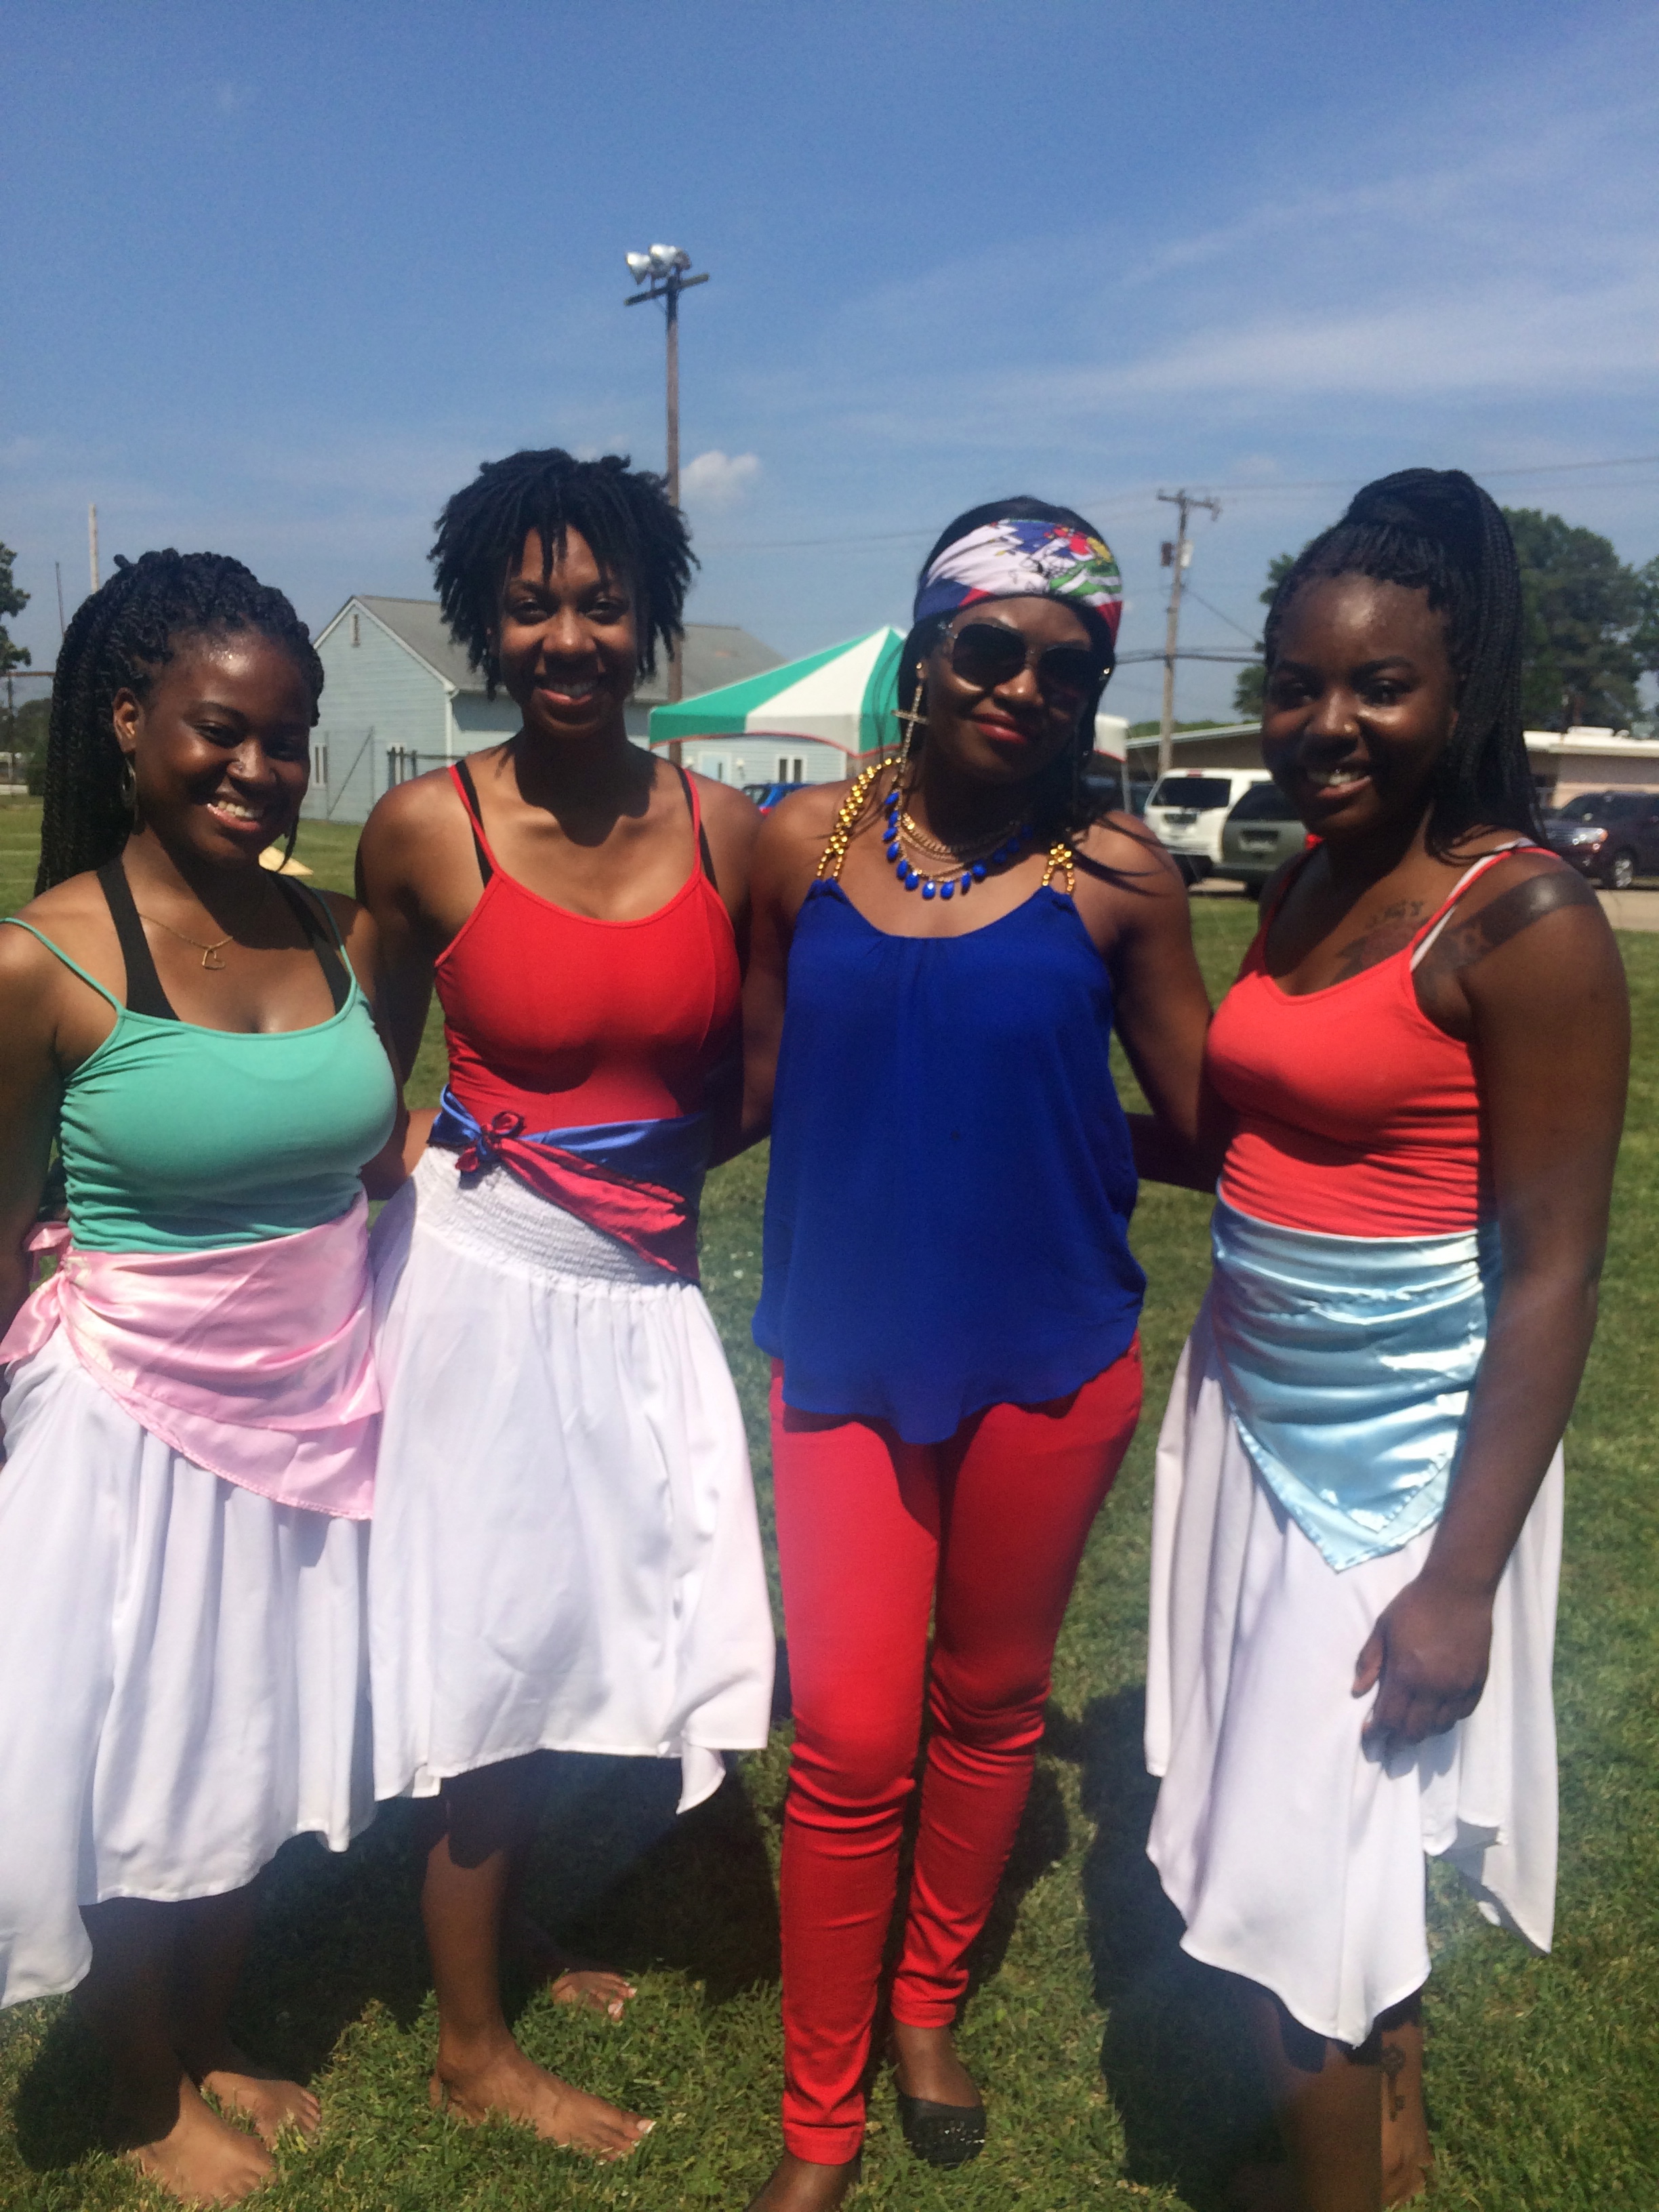  Kayla, Camille, and Shu'Keia with Wisline, a new friend interested in dancing together 